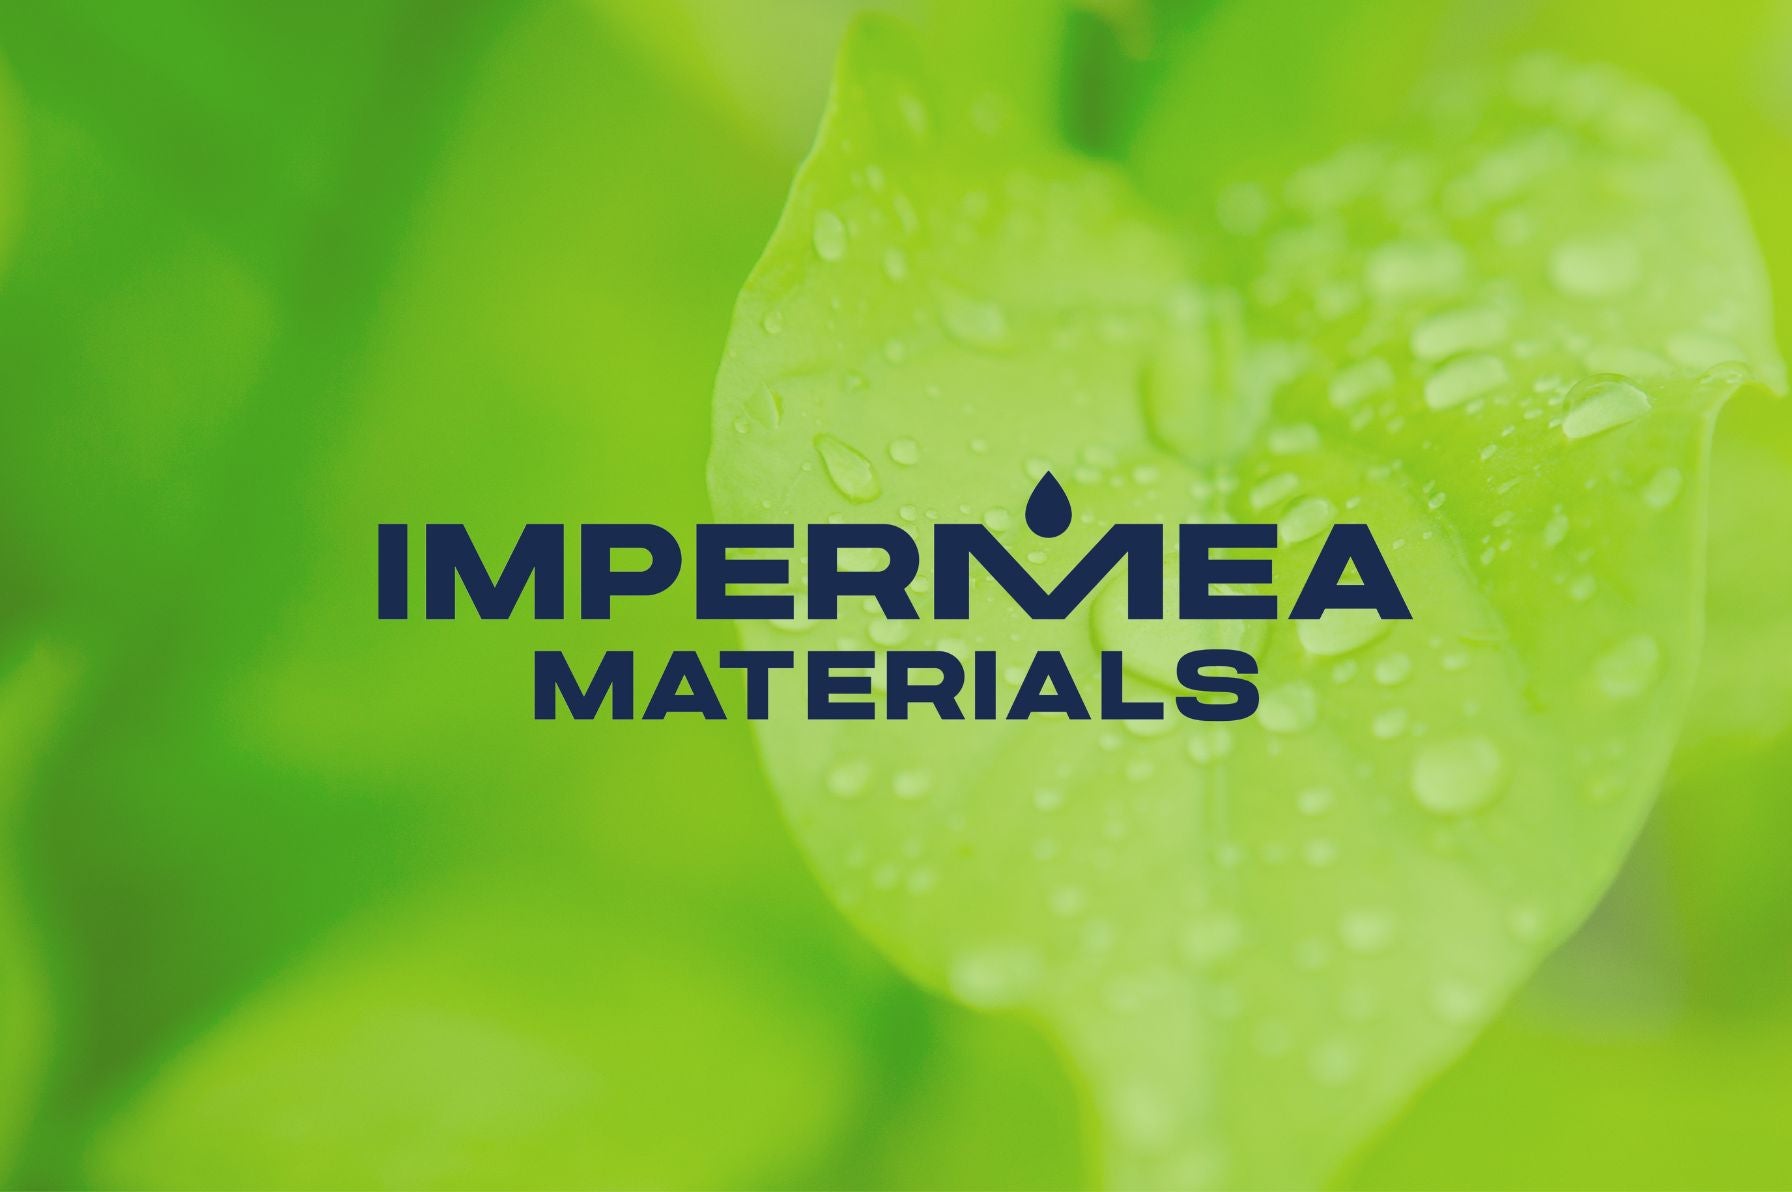 Impermea Materials Logo on Green Background